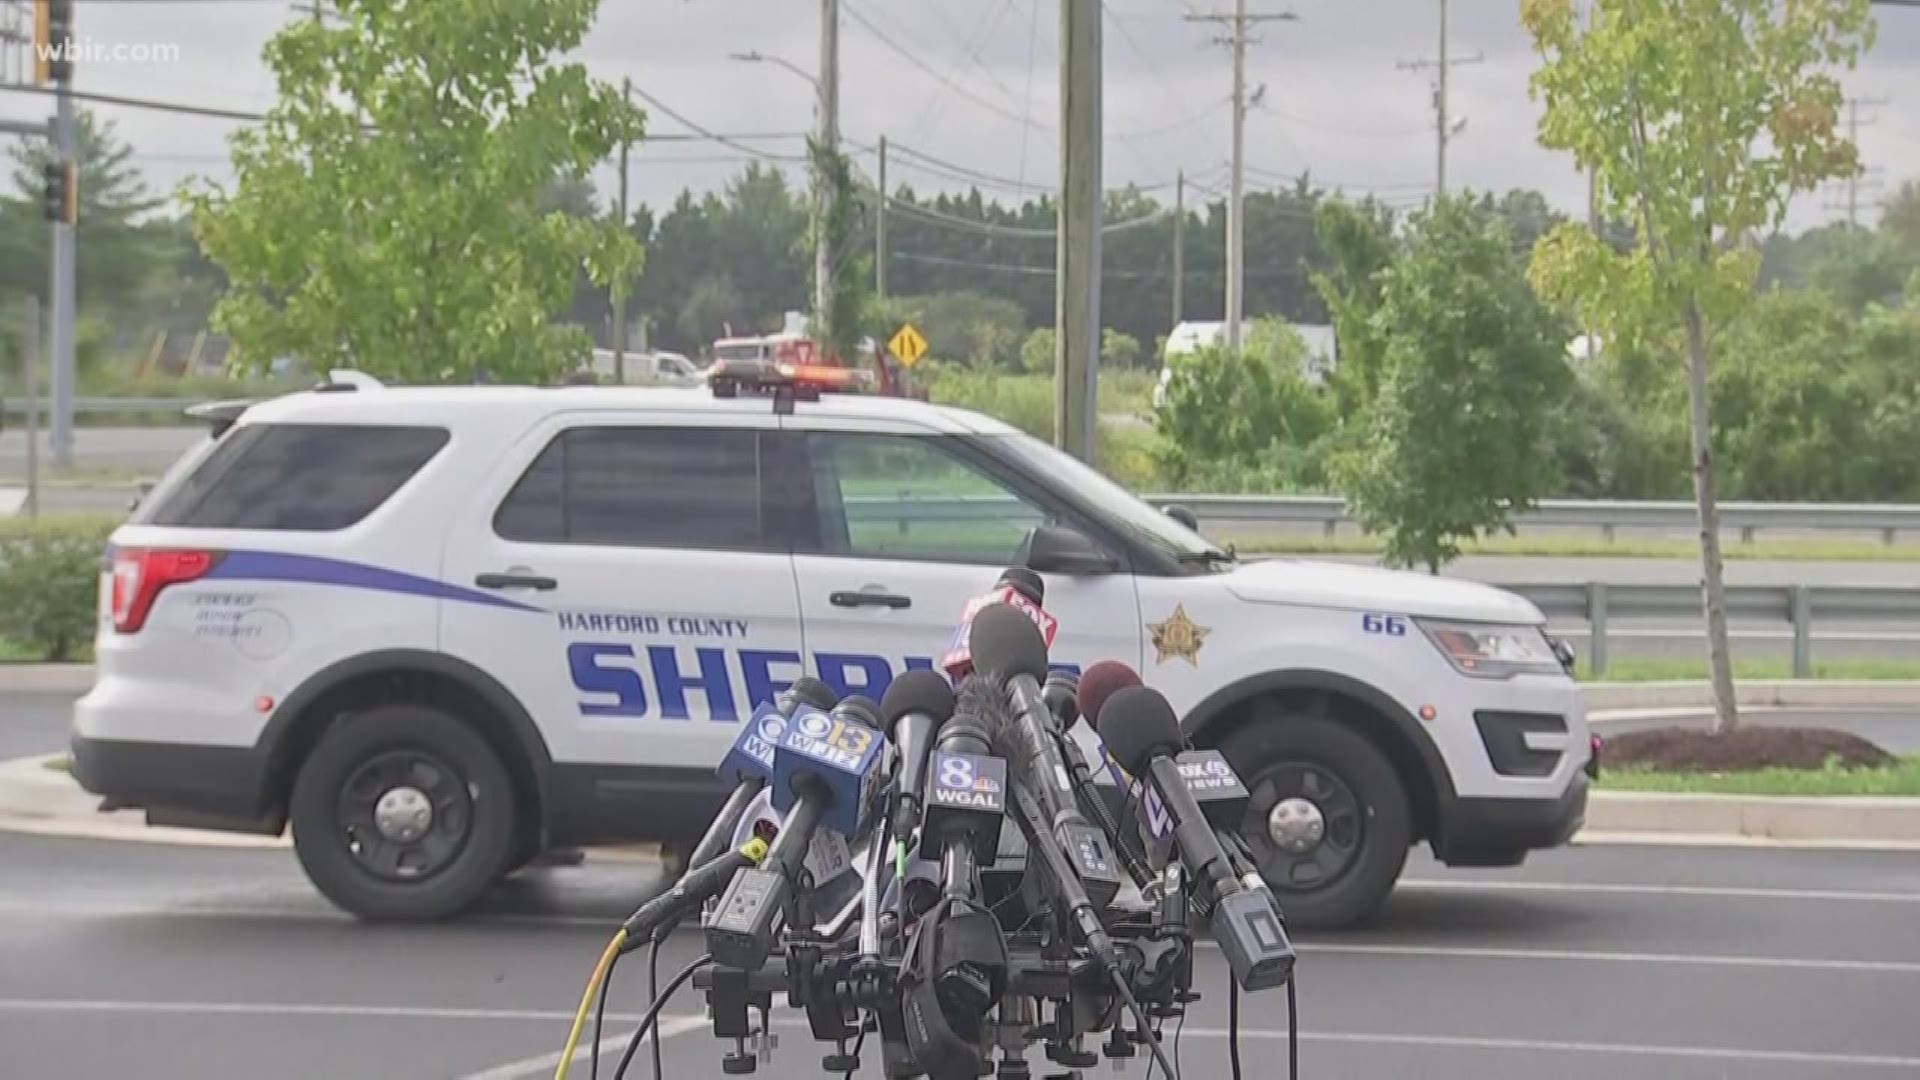 Officials say at least three people are dead after a shooting at a warehouse in Maryland.